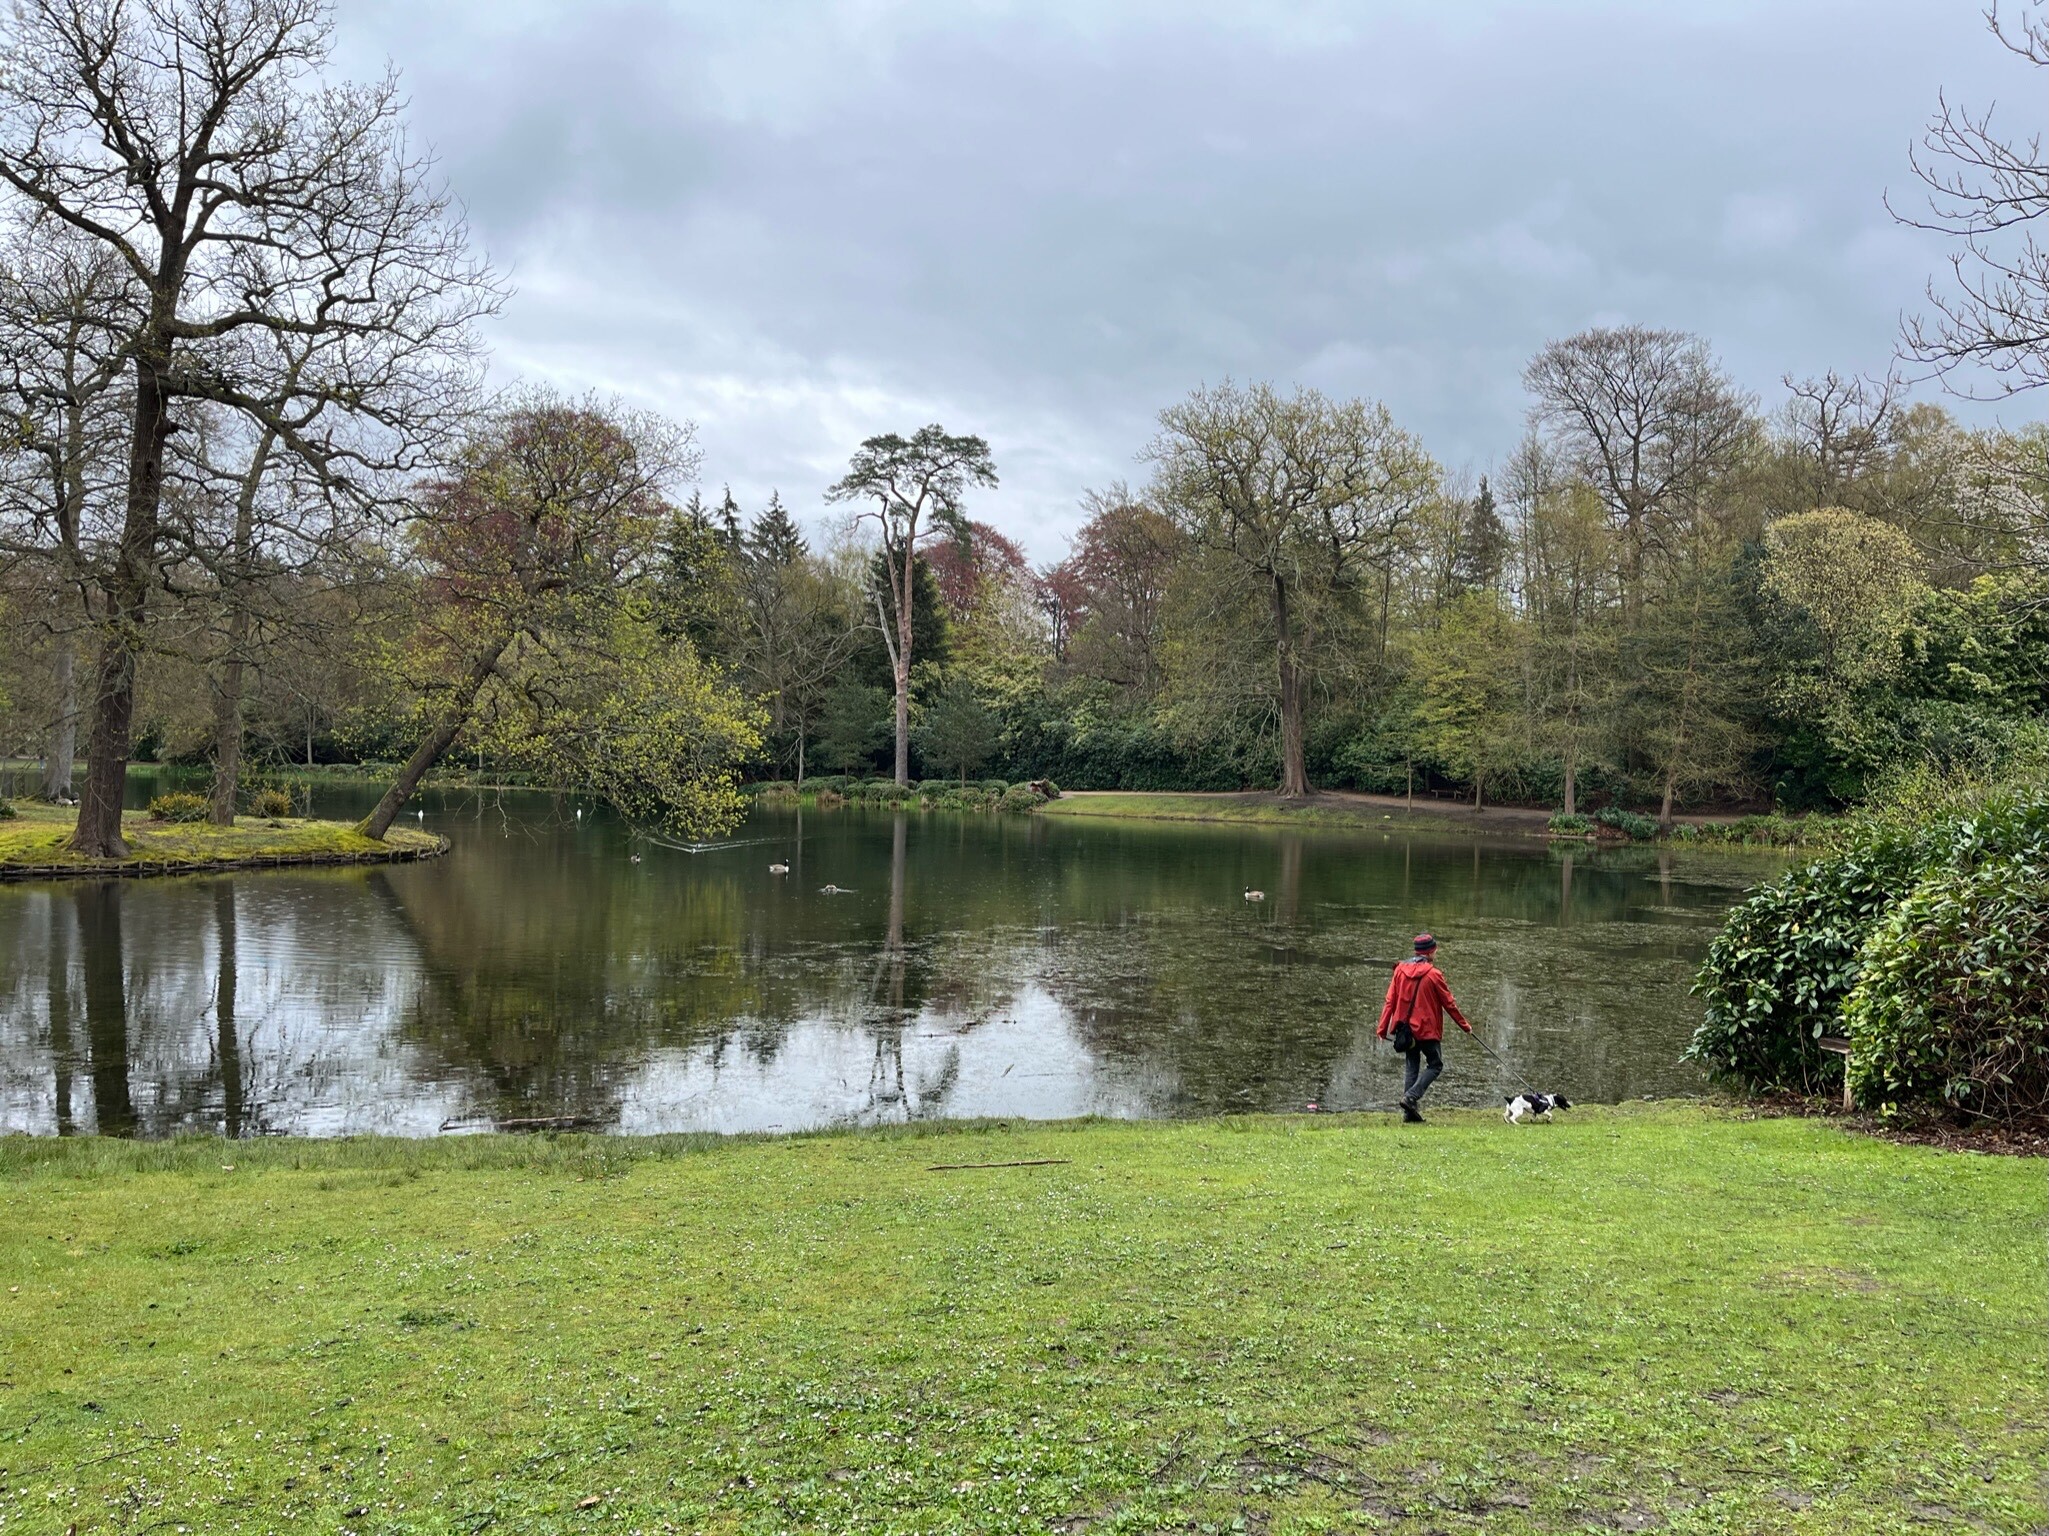 At Claremont Landscape Garden meeting more new humans